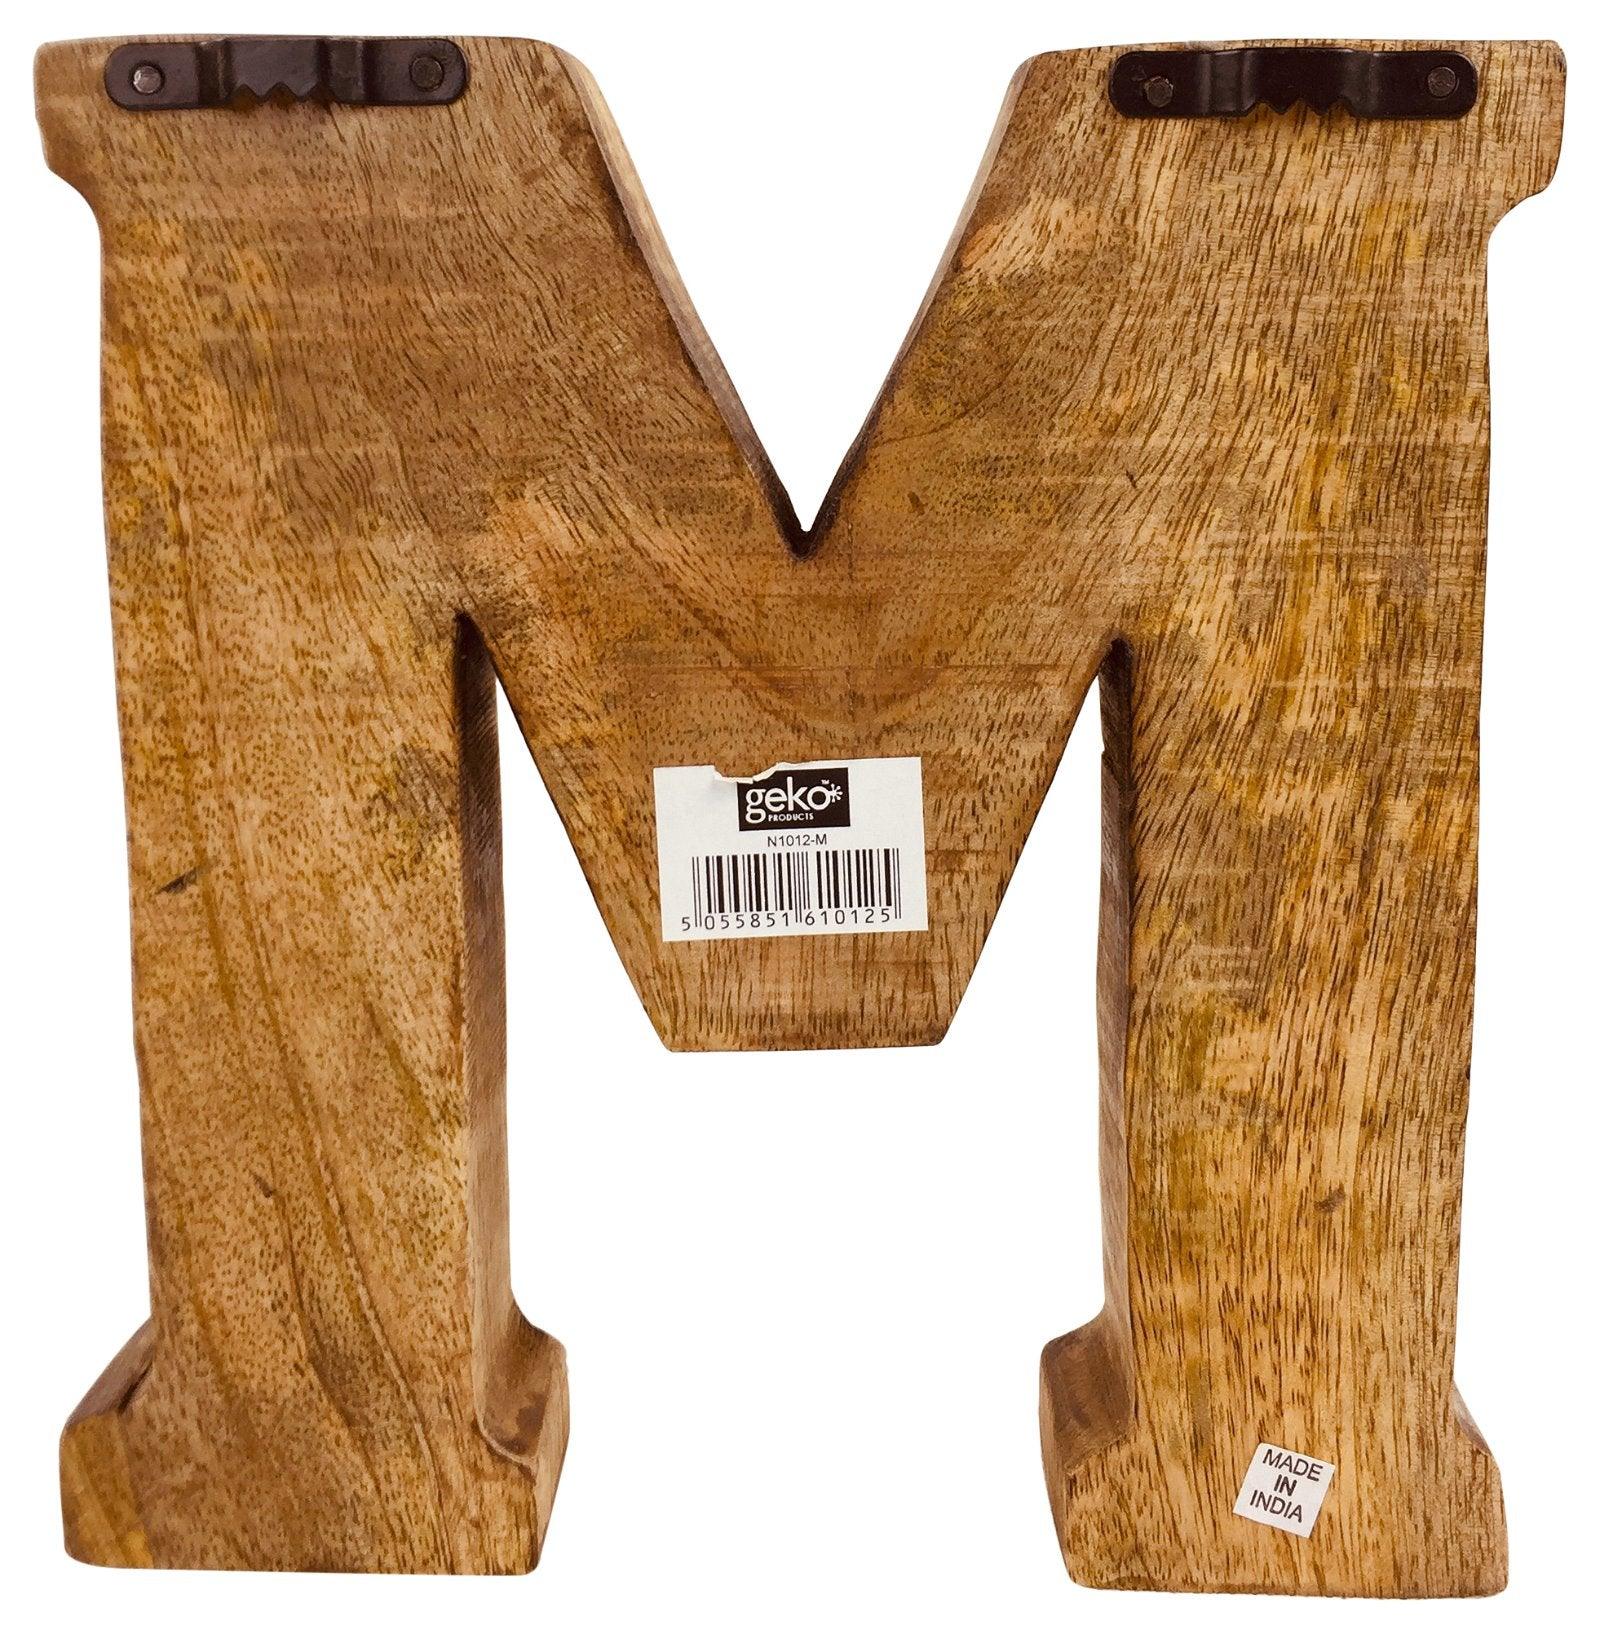 View Hand Carved Wooden Geometric Letters Mum information